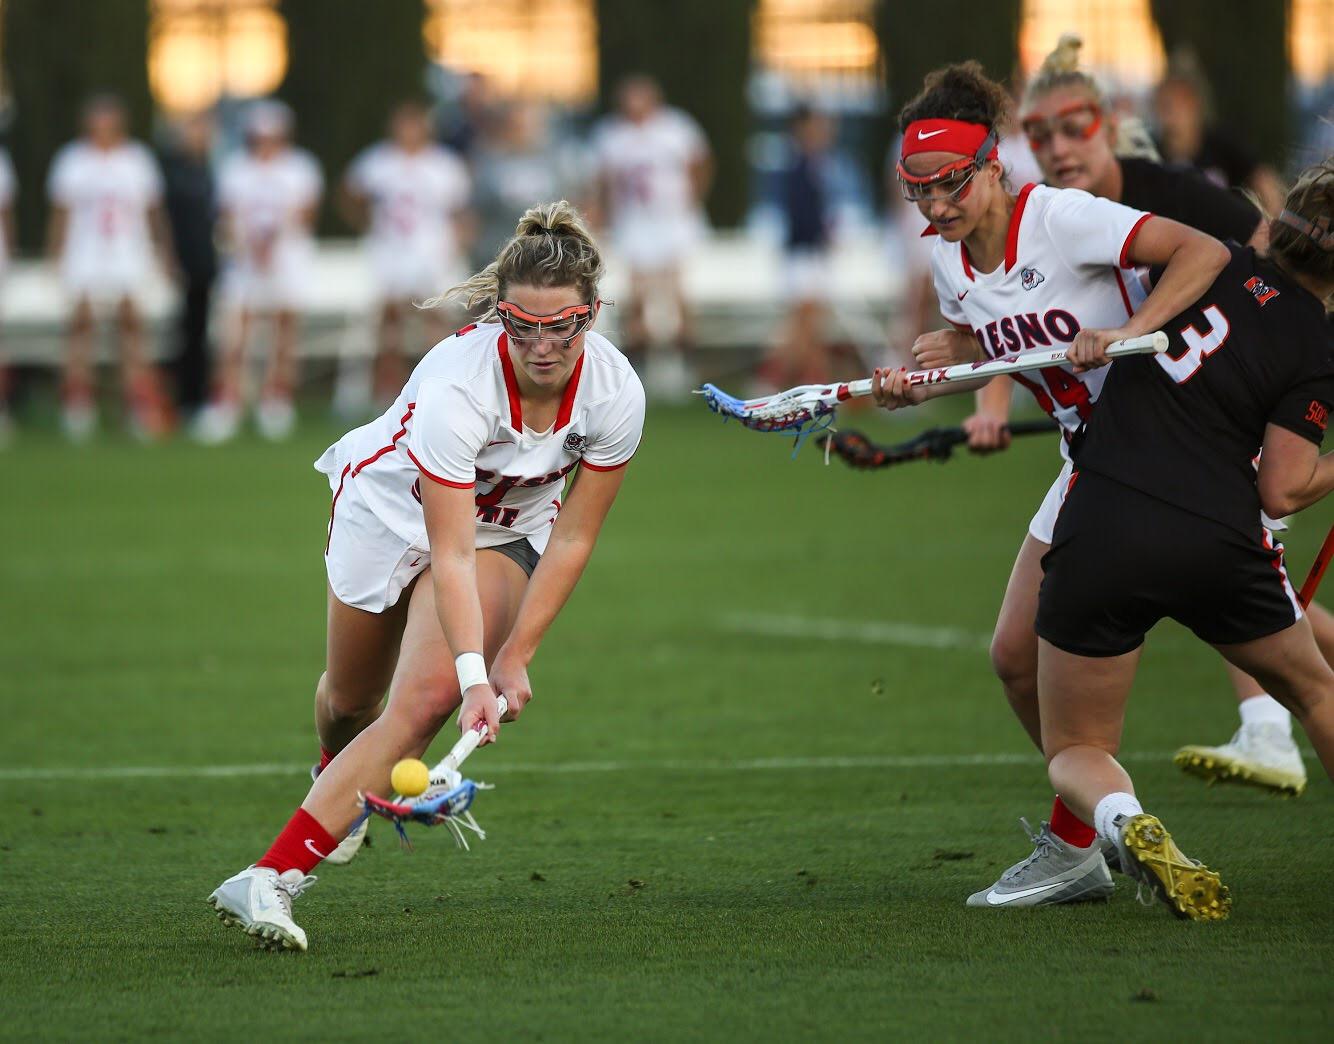 Sophomore Olivia Mannon stretches for a loose ball during Fresno State’s lacrosse game against Mercer University on Feb. 16, 2018 at the Fresno State Soccer and Lacrosse Stadium. (Alejandro Soto/ The Collegian)